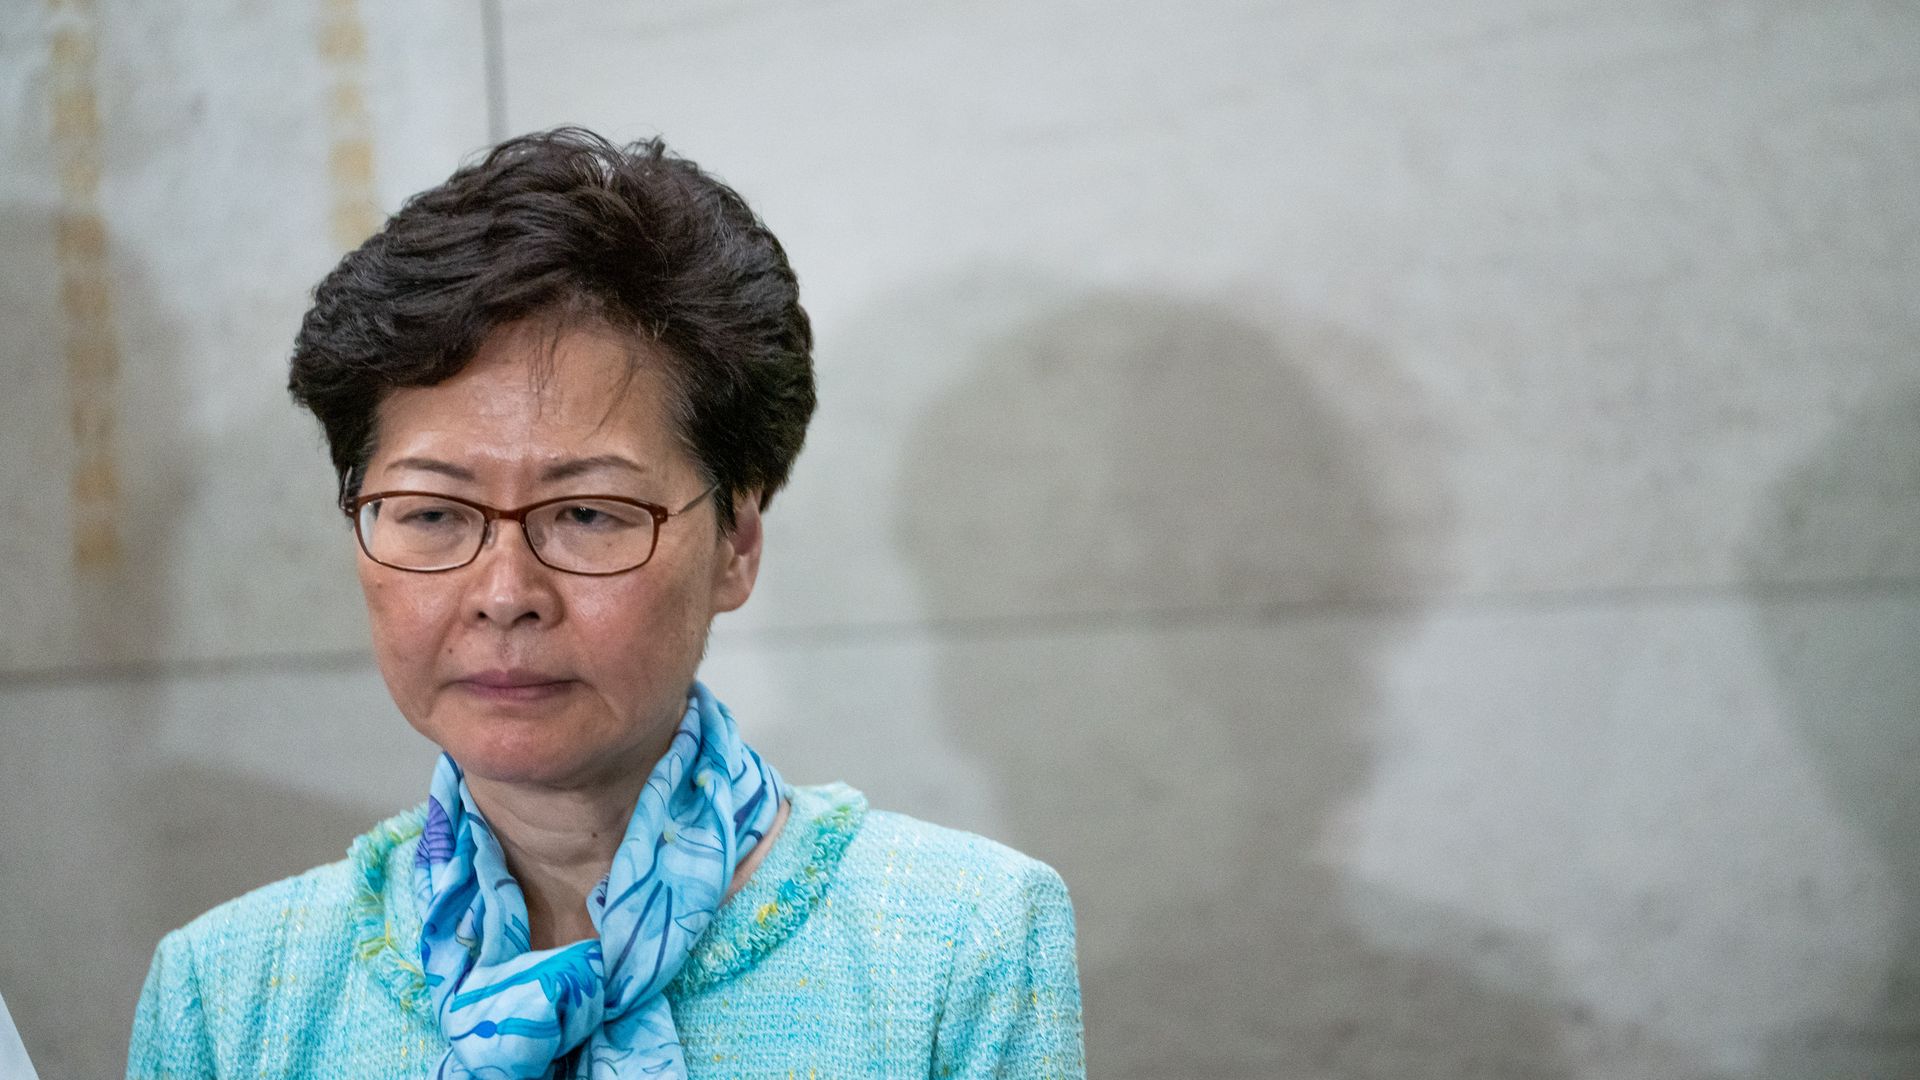 Carrie Lam, Hong Kong's chief executive, speaks during a news conference on July 2